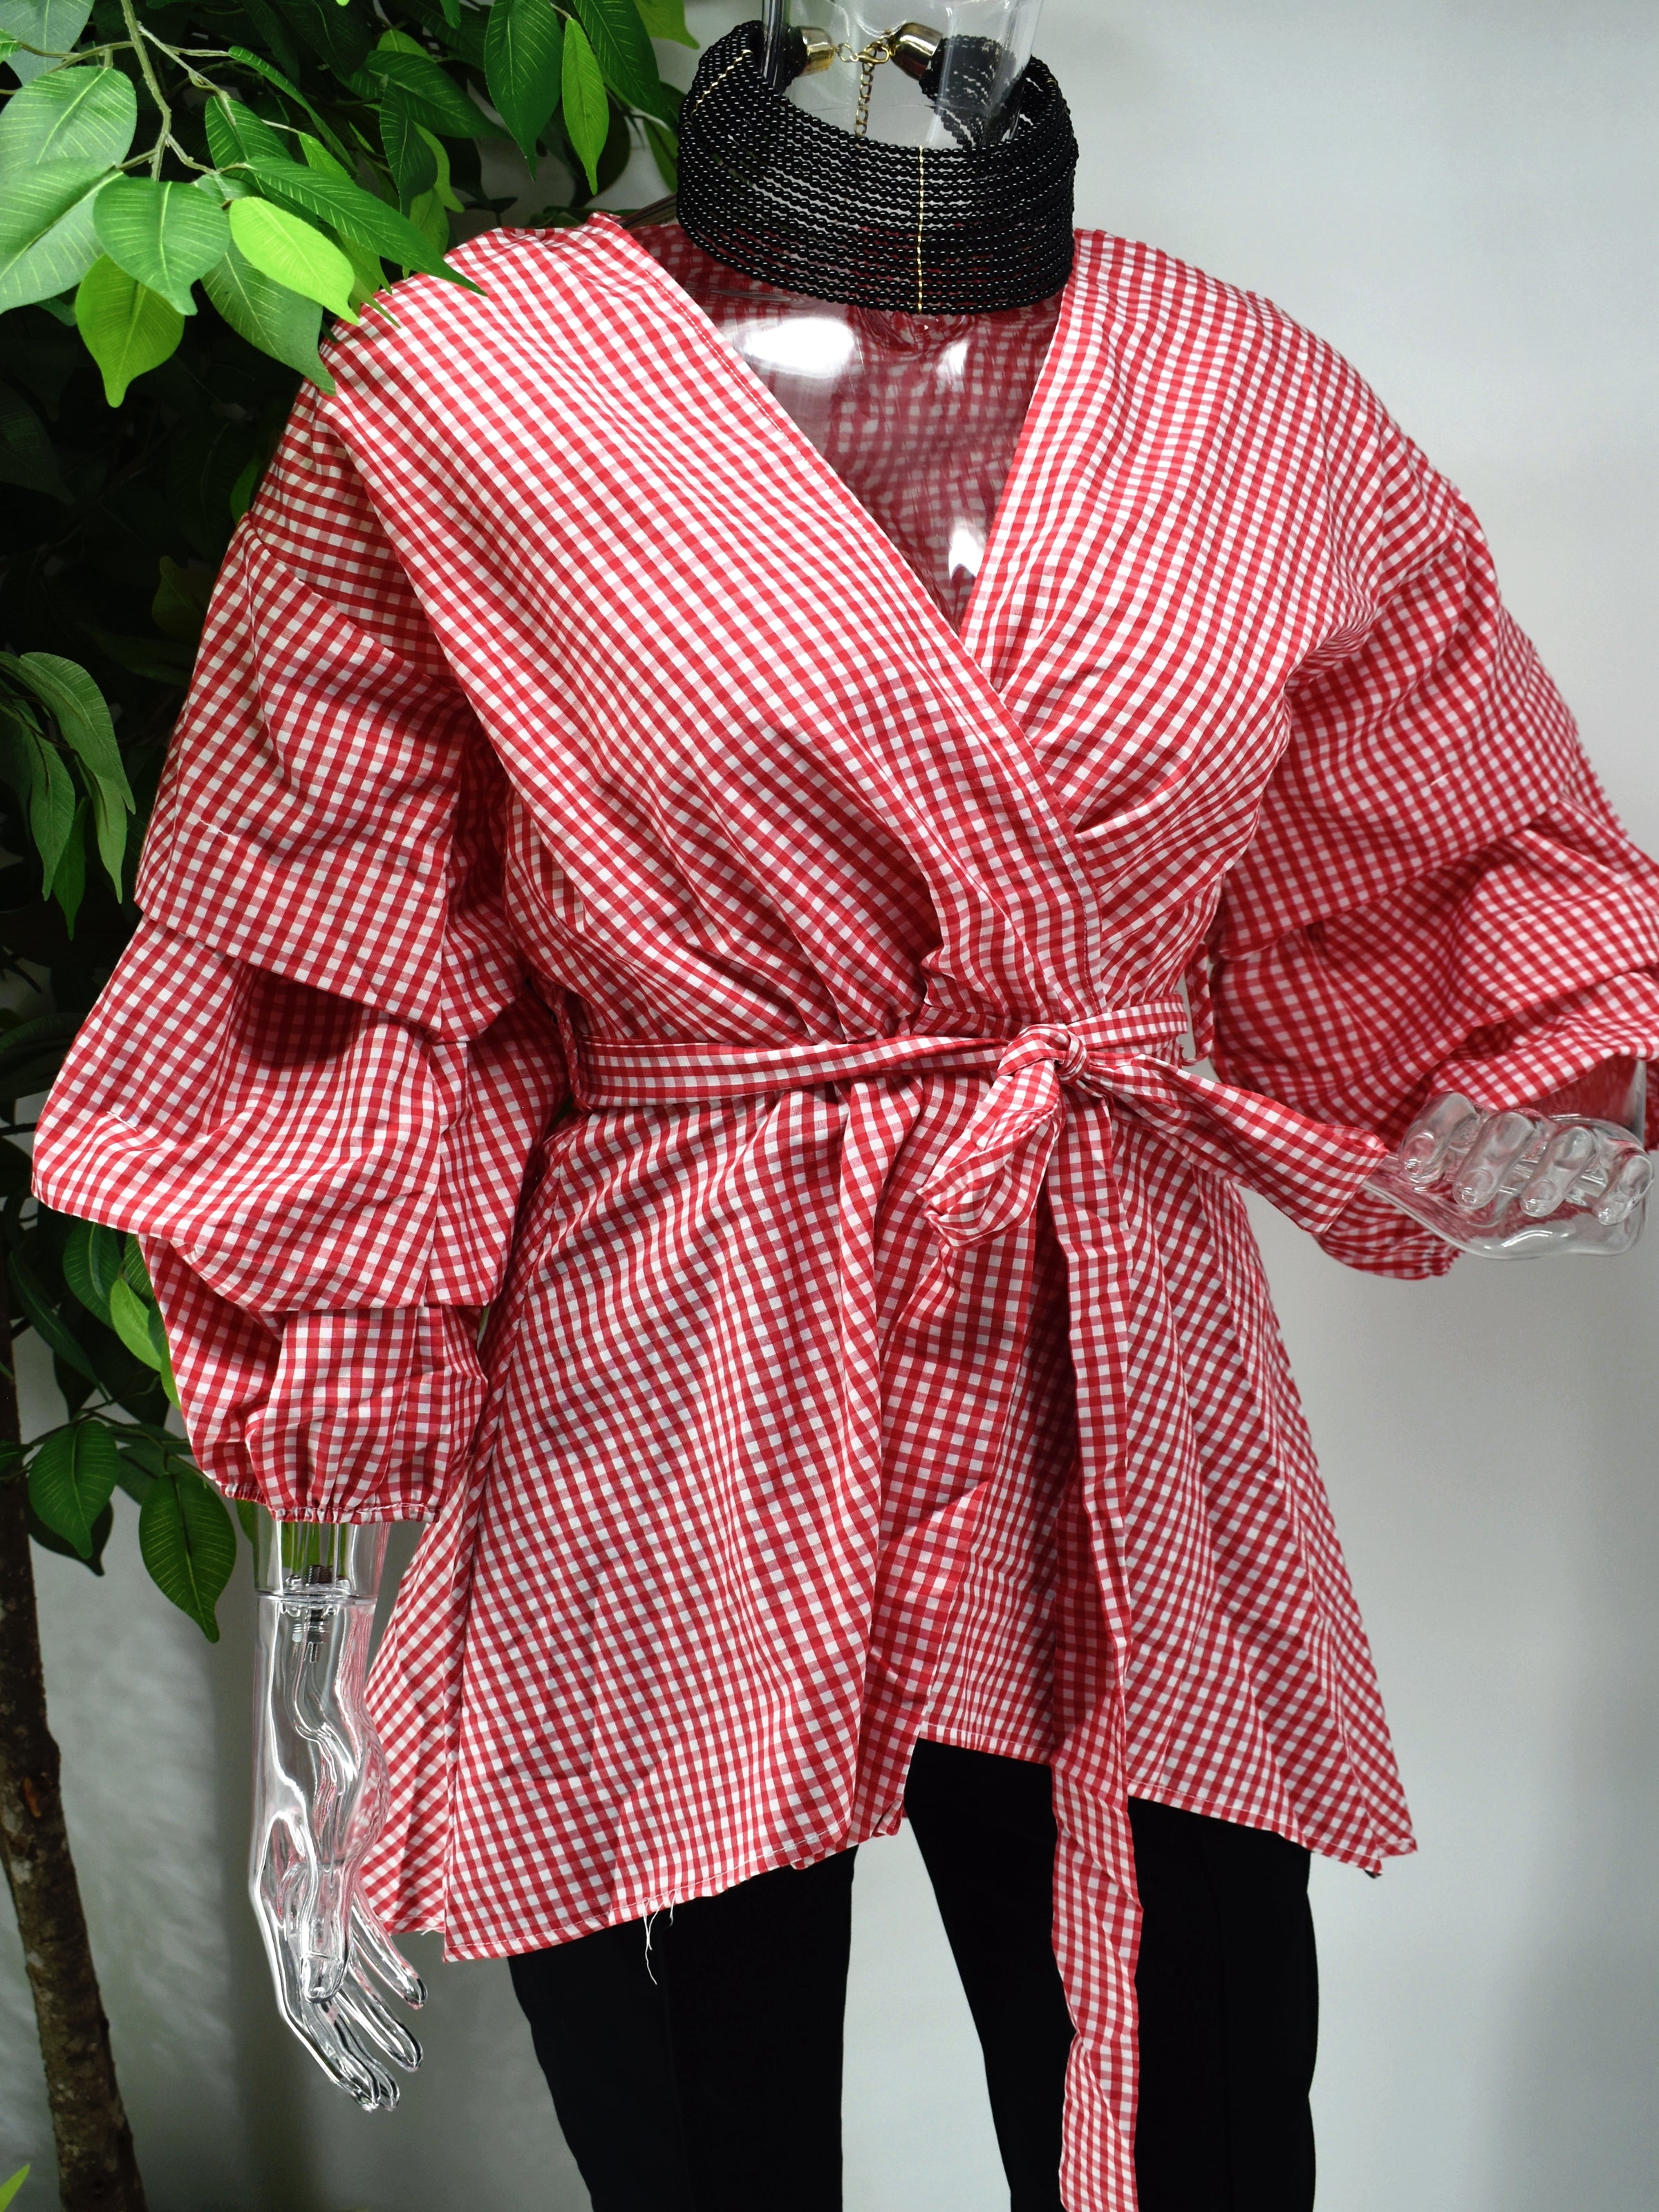 A classic print meets a modern design with our Birdina red and white gingham print top. Our Birdina is full of style and pizzaz. It has a v-neckline, ruffled puffed sleeve and an uneven hem. The design is completed with a tied cinched waist.